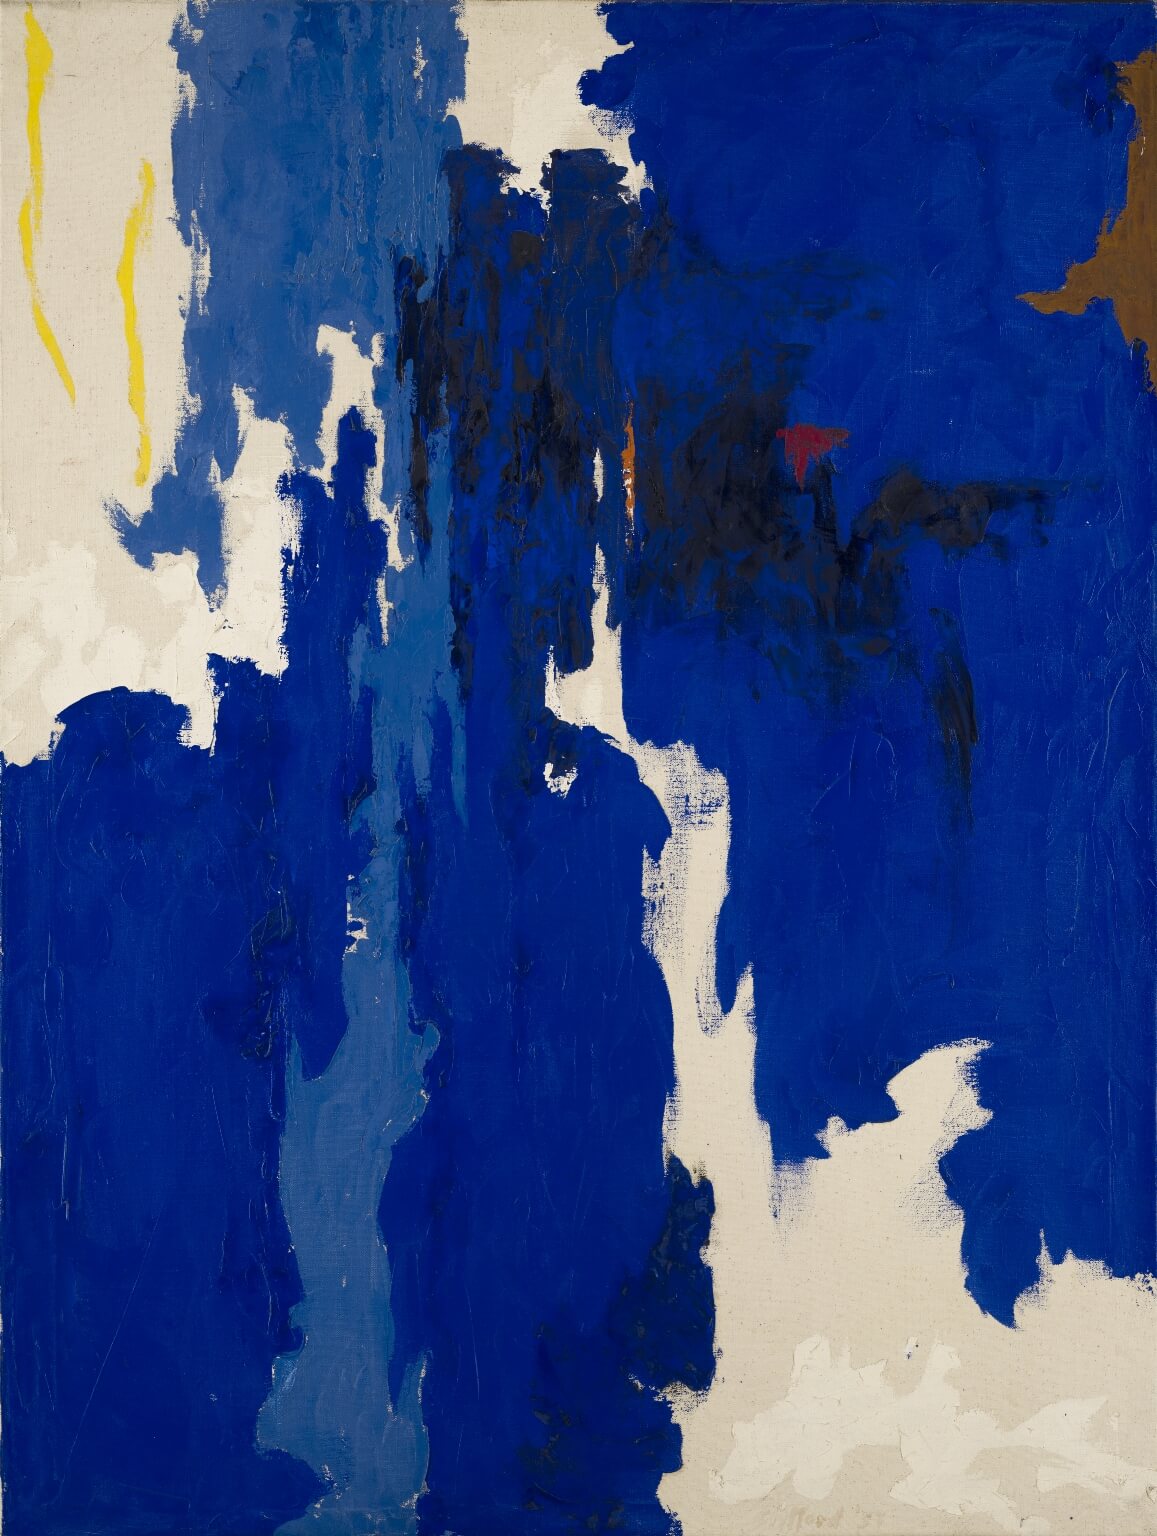 A vertical abstract painting with dark and light blue shapes swirling around a center area with bare canvas, white, yellow, black and hints of red